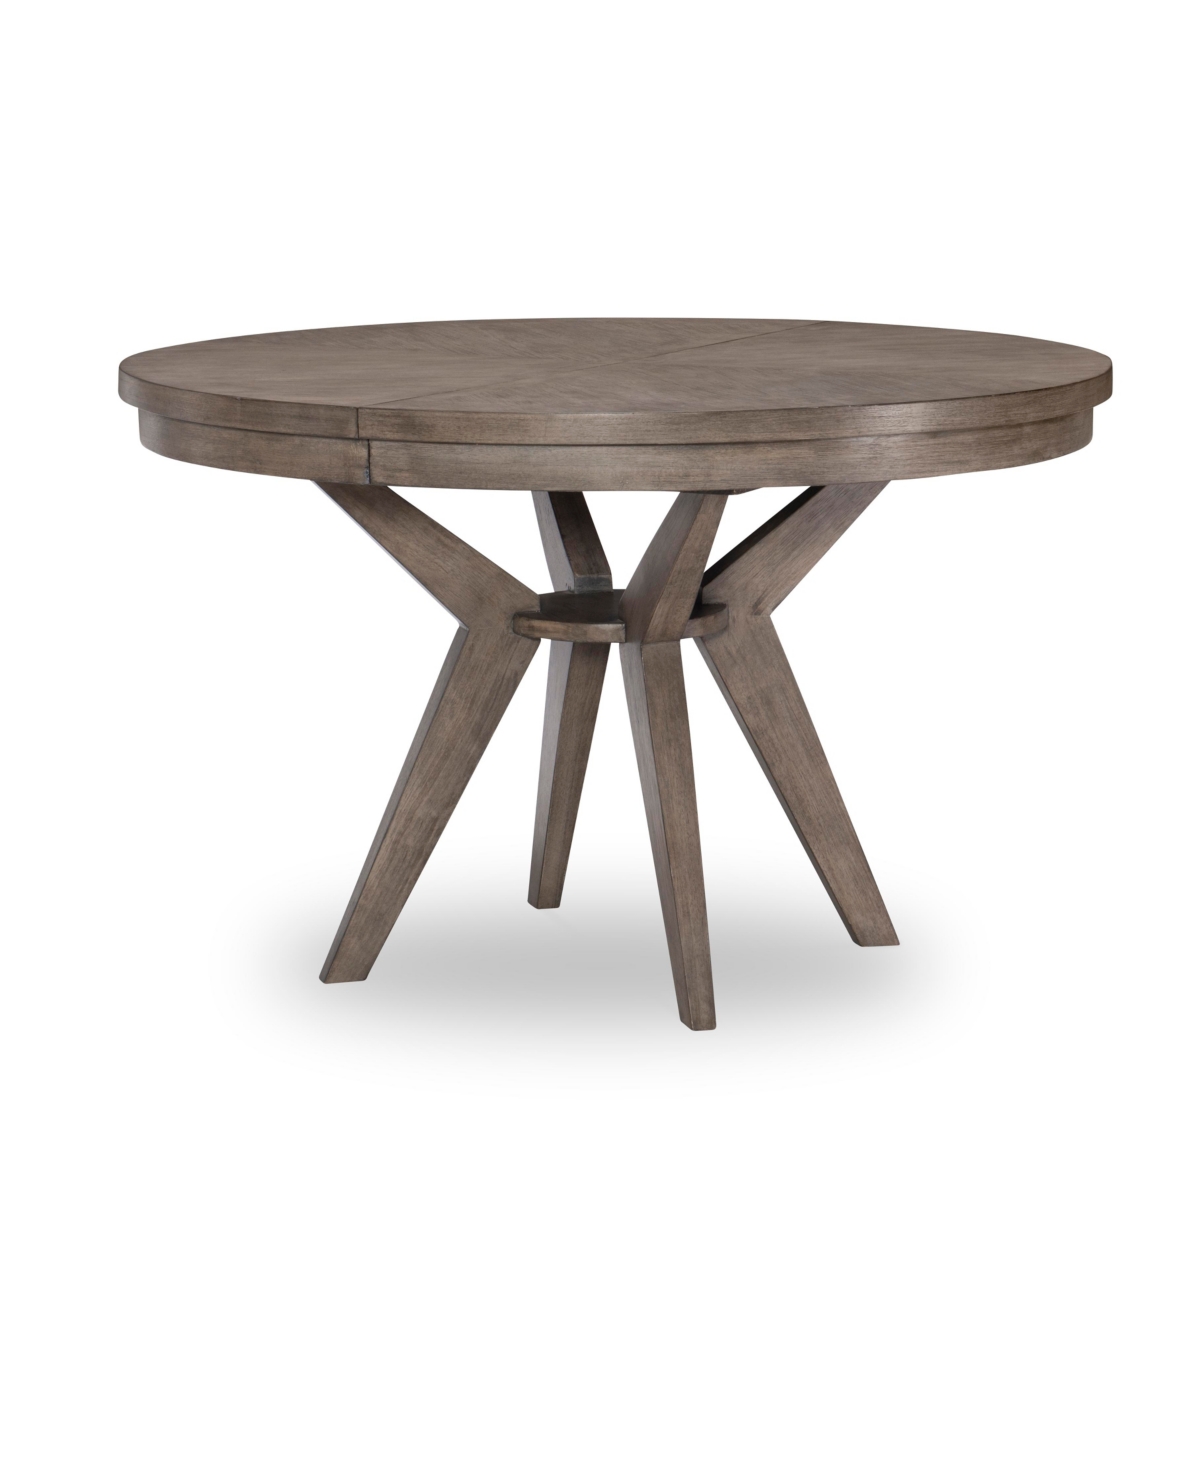 Macy's Greystone Ii Expandable Round Dining Table